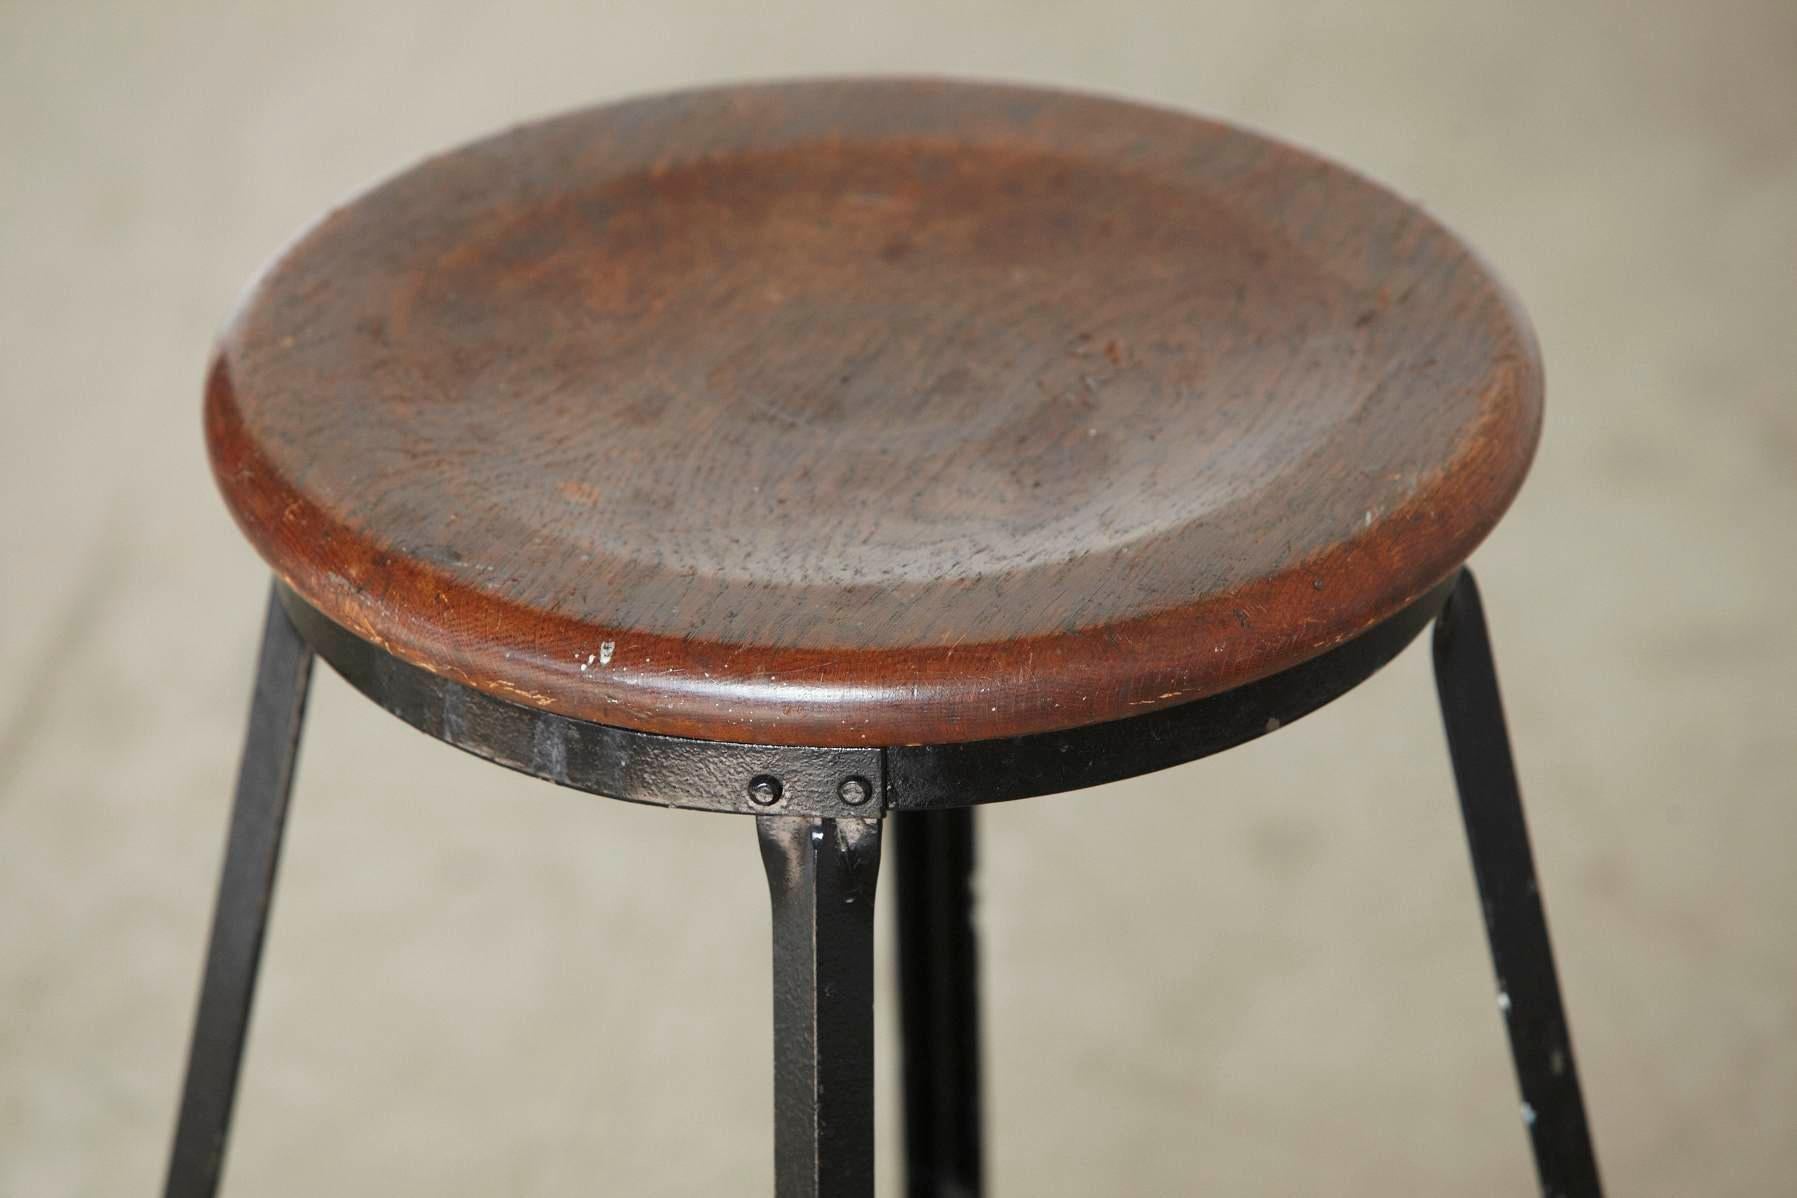 Iron Vintage Industrial Stool with Steel Frame and Oak Seat, circa 1940s